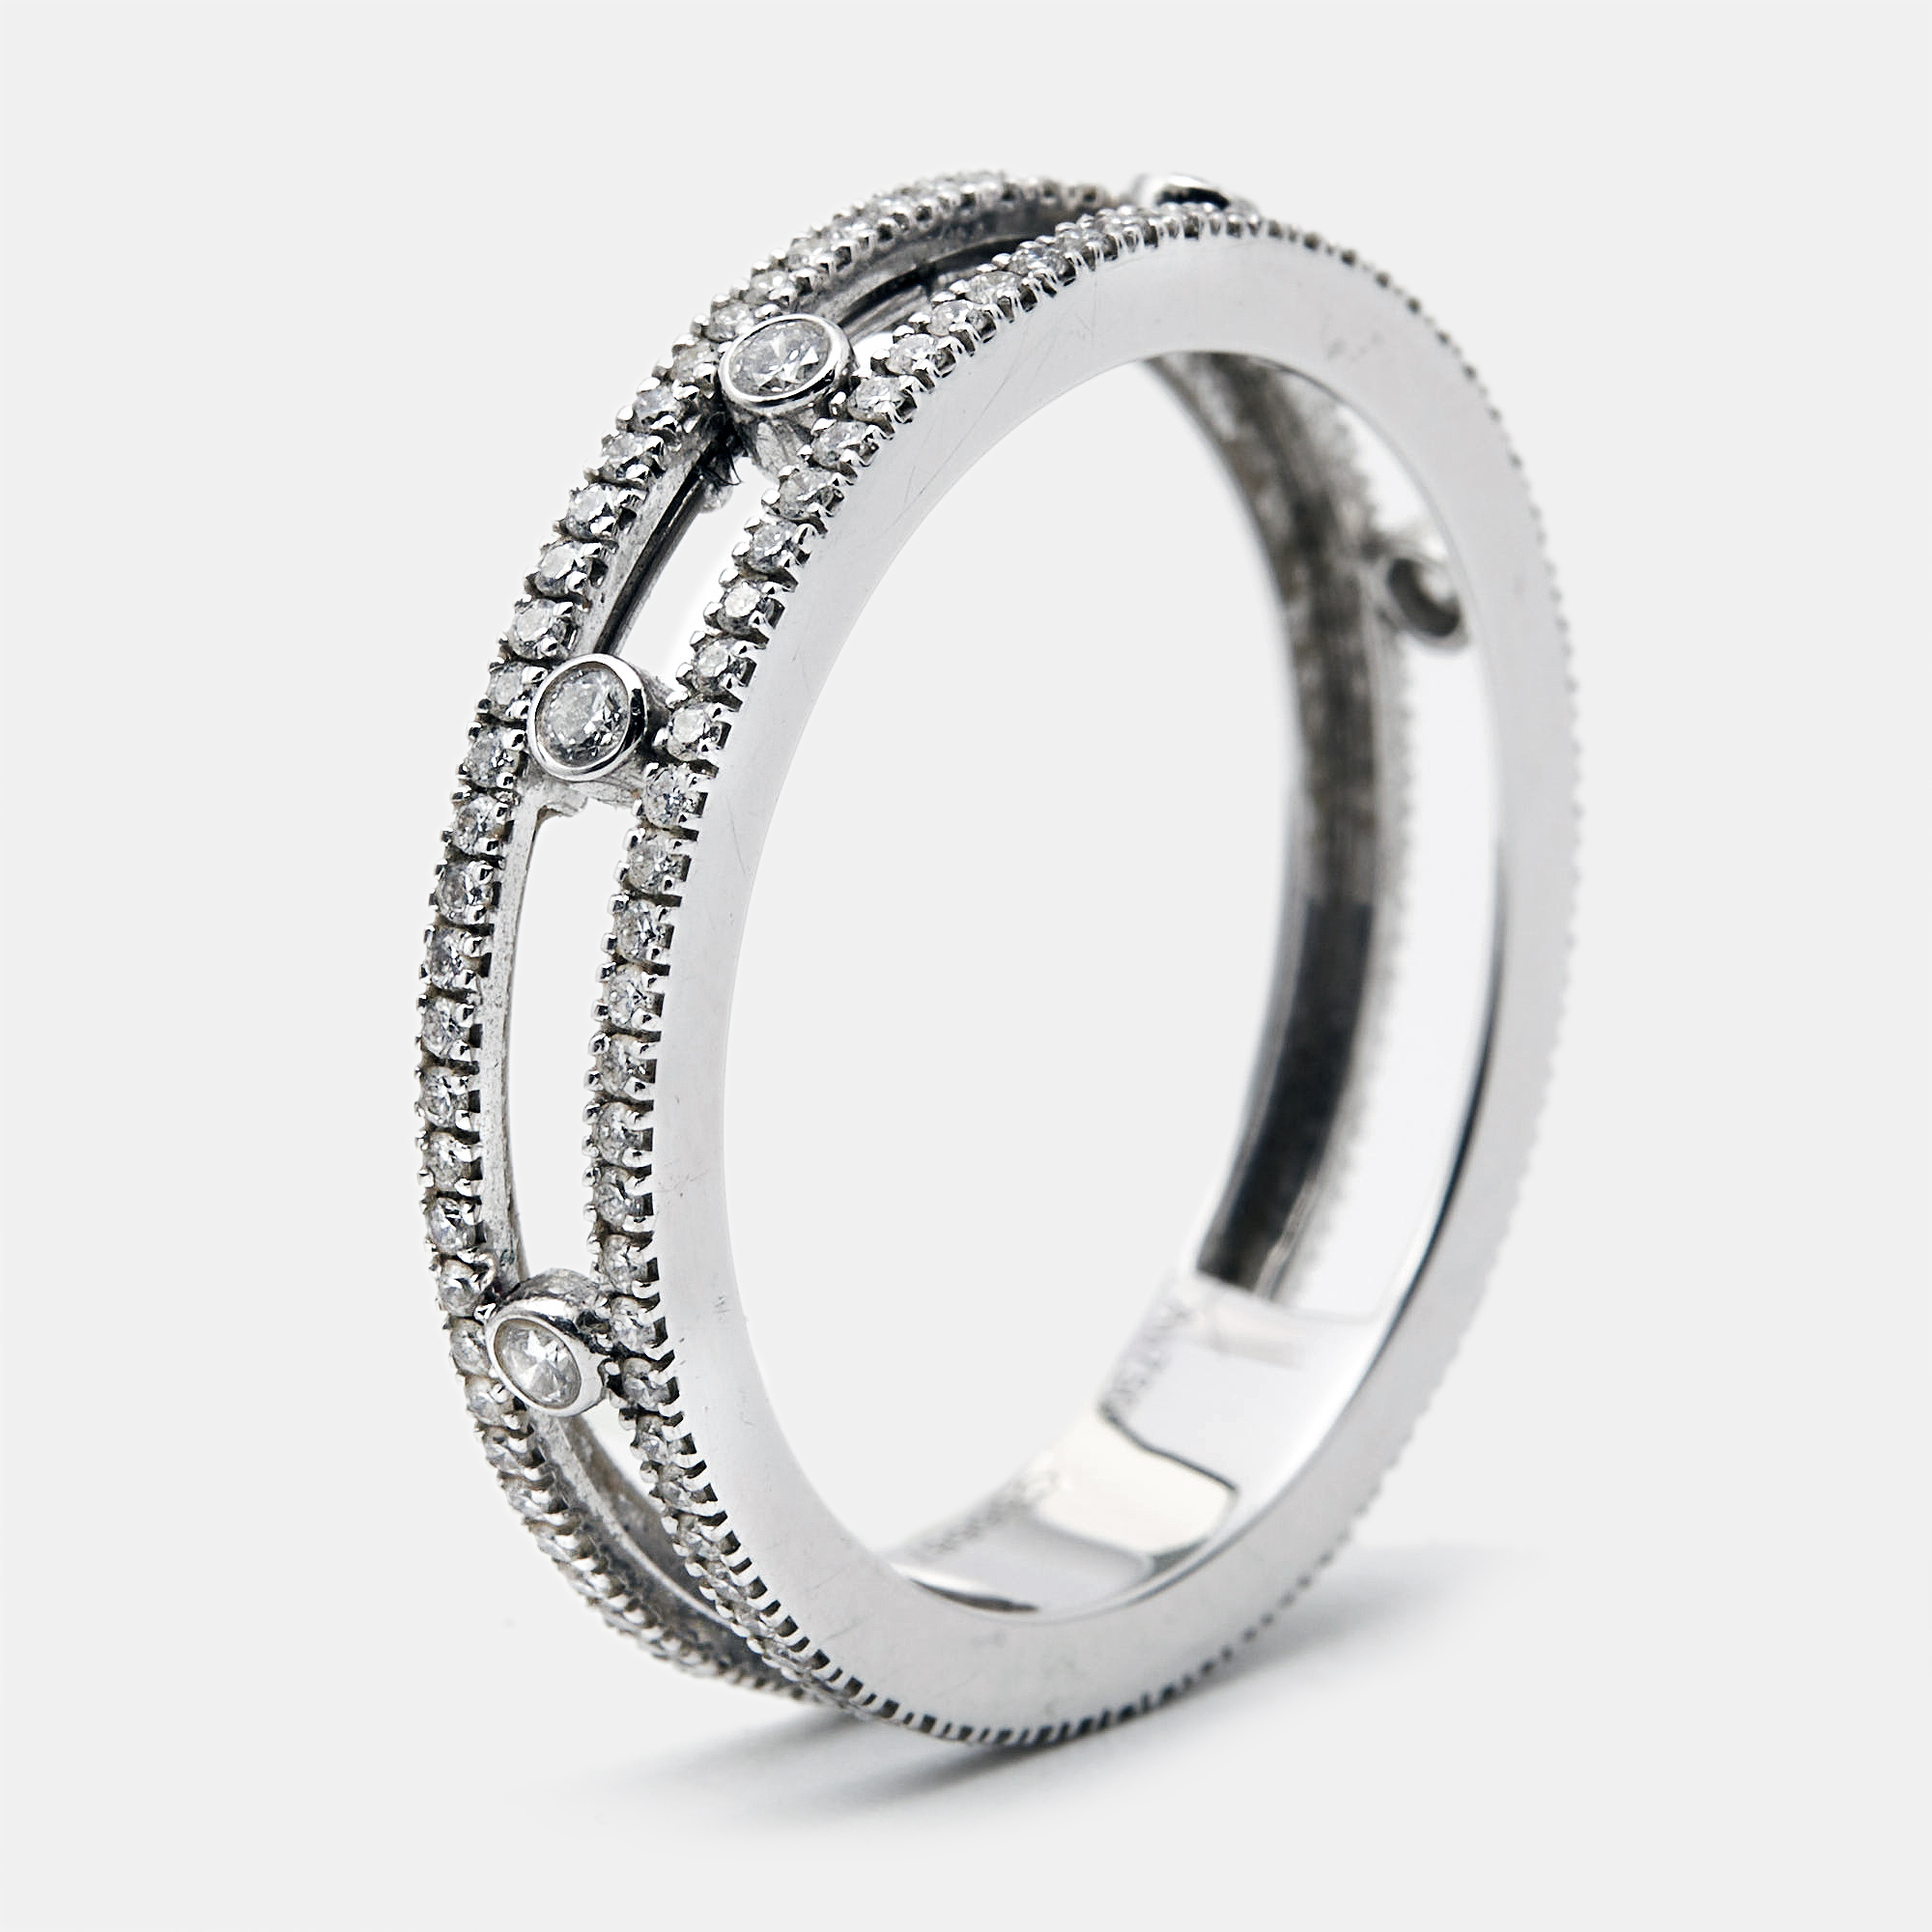 Mark one of the most memorable occasions of your life with this coveted Messika Move ring. Crafted using 18k white gold this charming ring features carefully set diamonds for a dazzling update. Refined and elegant this Messika wedding ring evokes a timeless allure with its distinctive design.